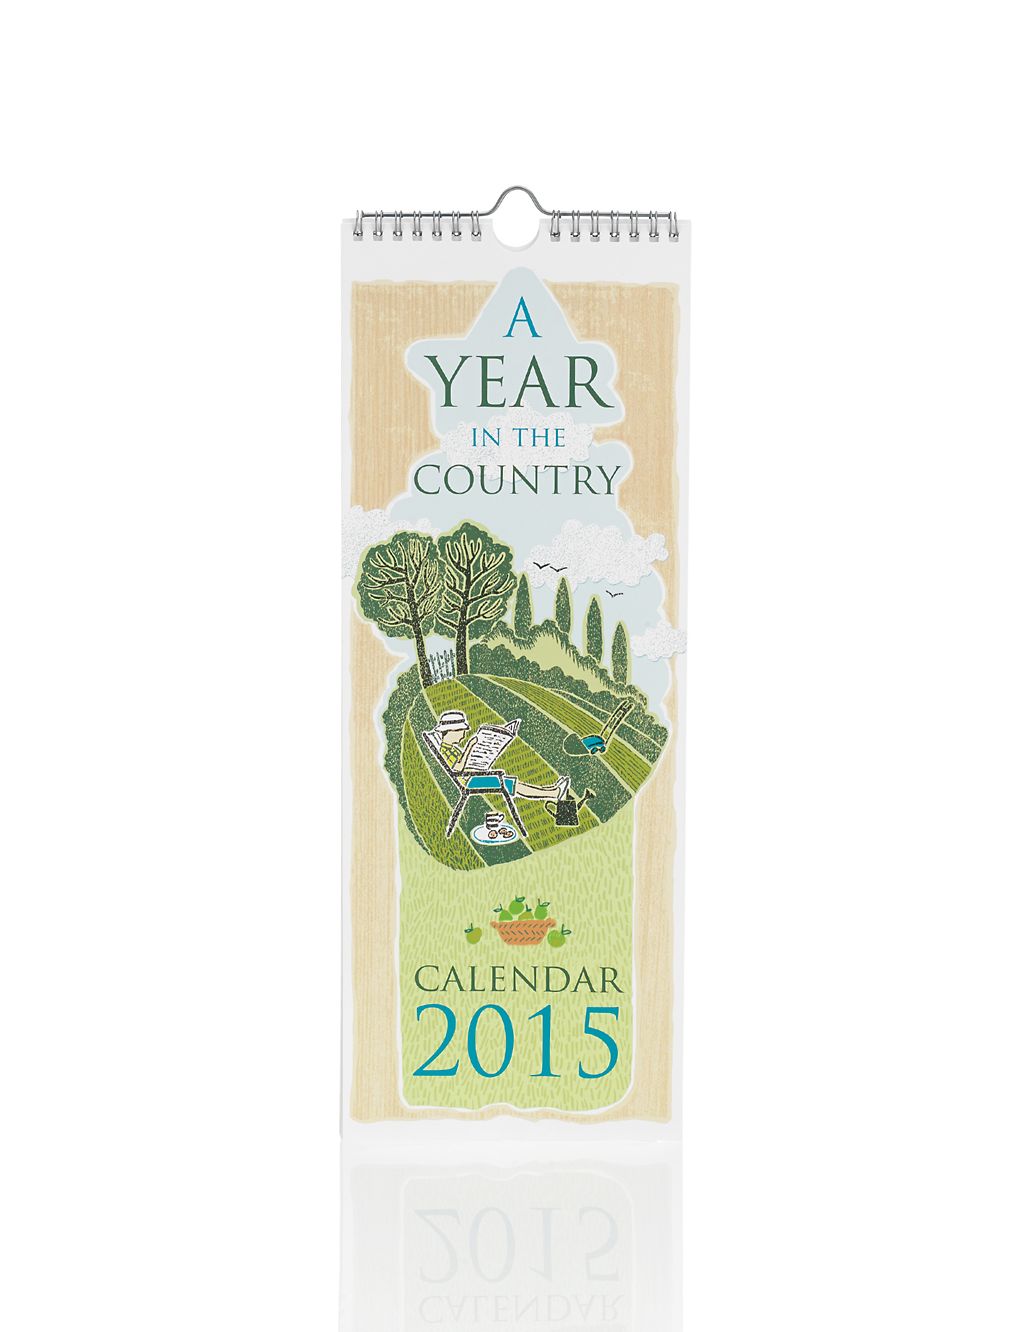 A Year in the Country Calendar 2015 3 of 3